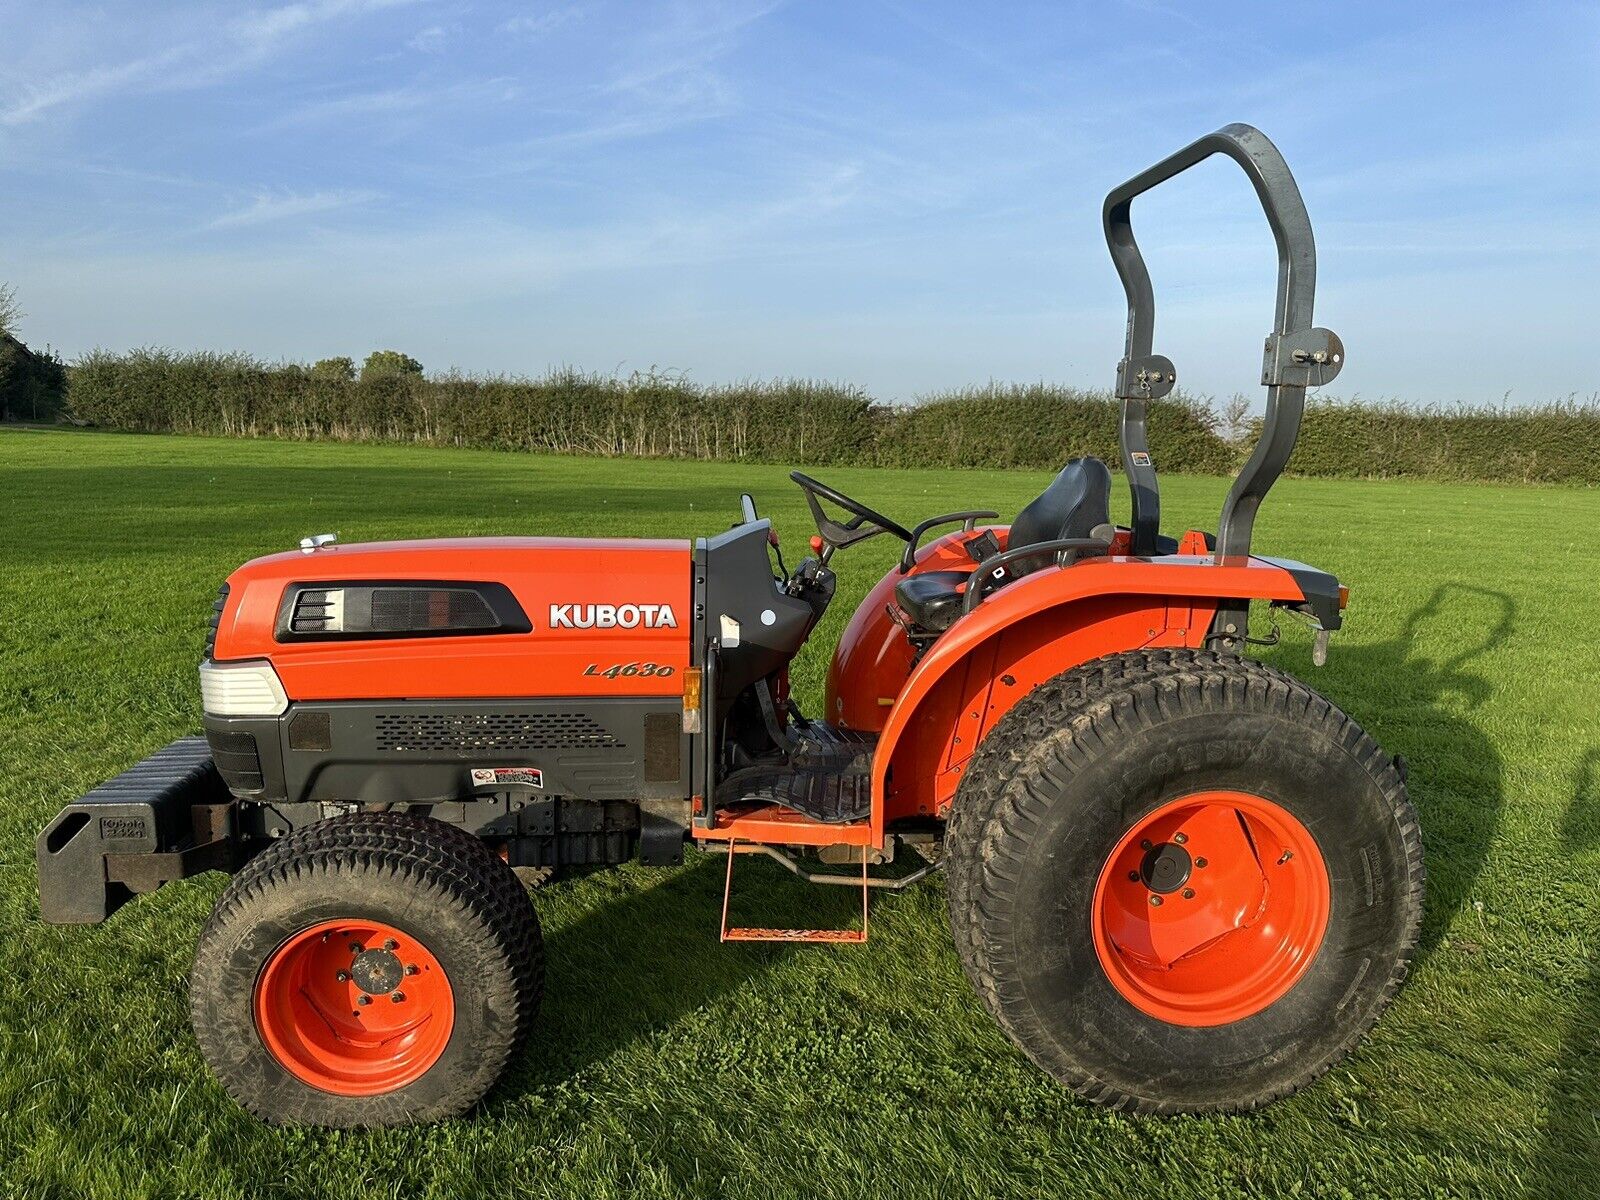 2008 KUBOTA L4630 4WD COMPACT TRACTOR TURF TYRES